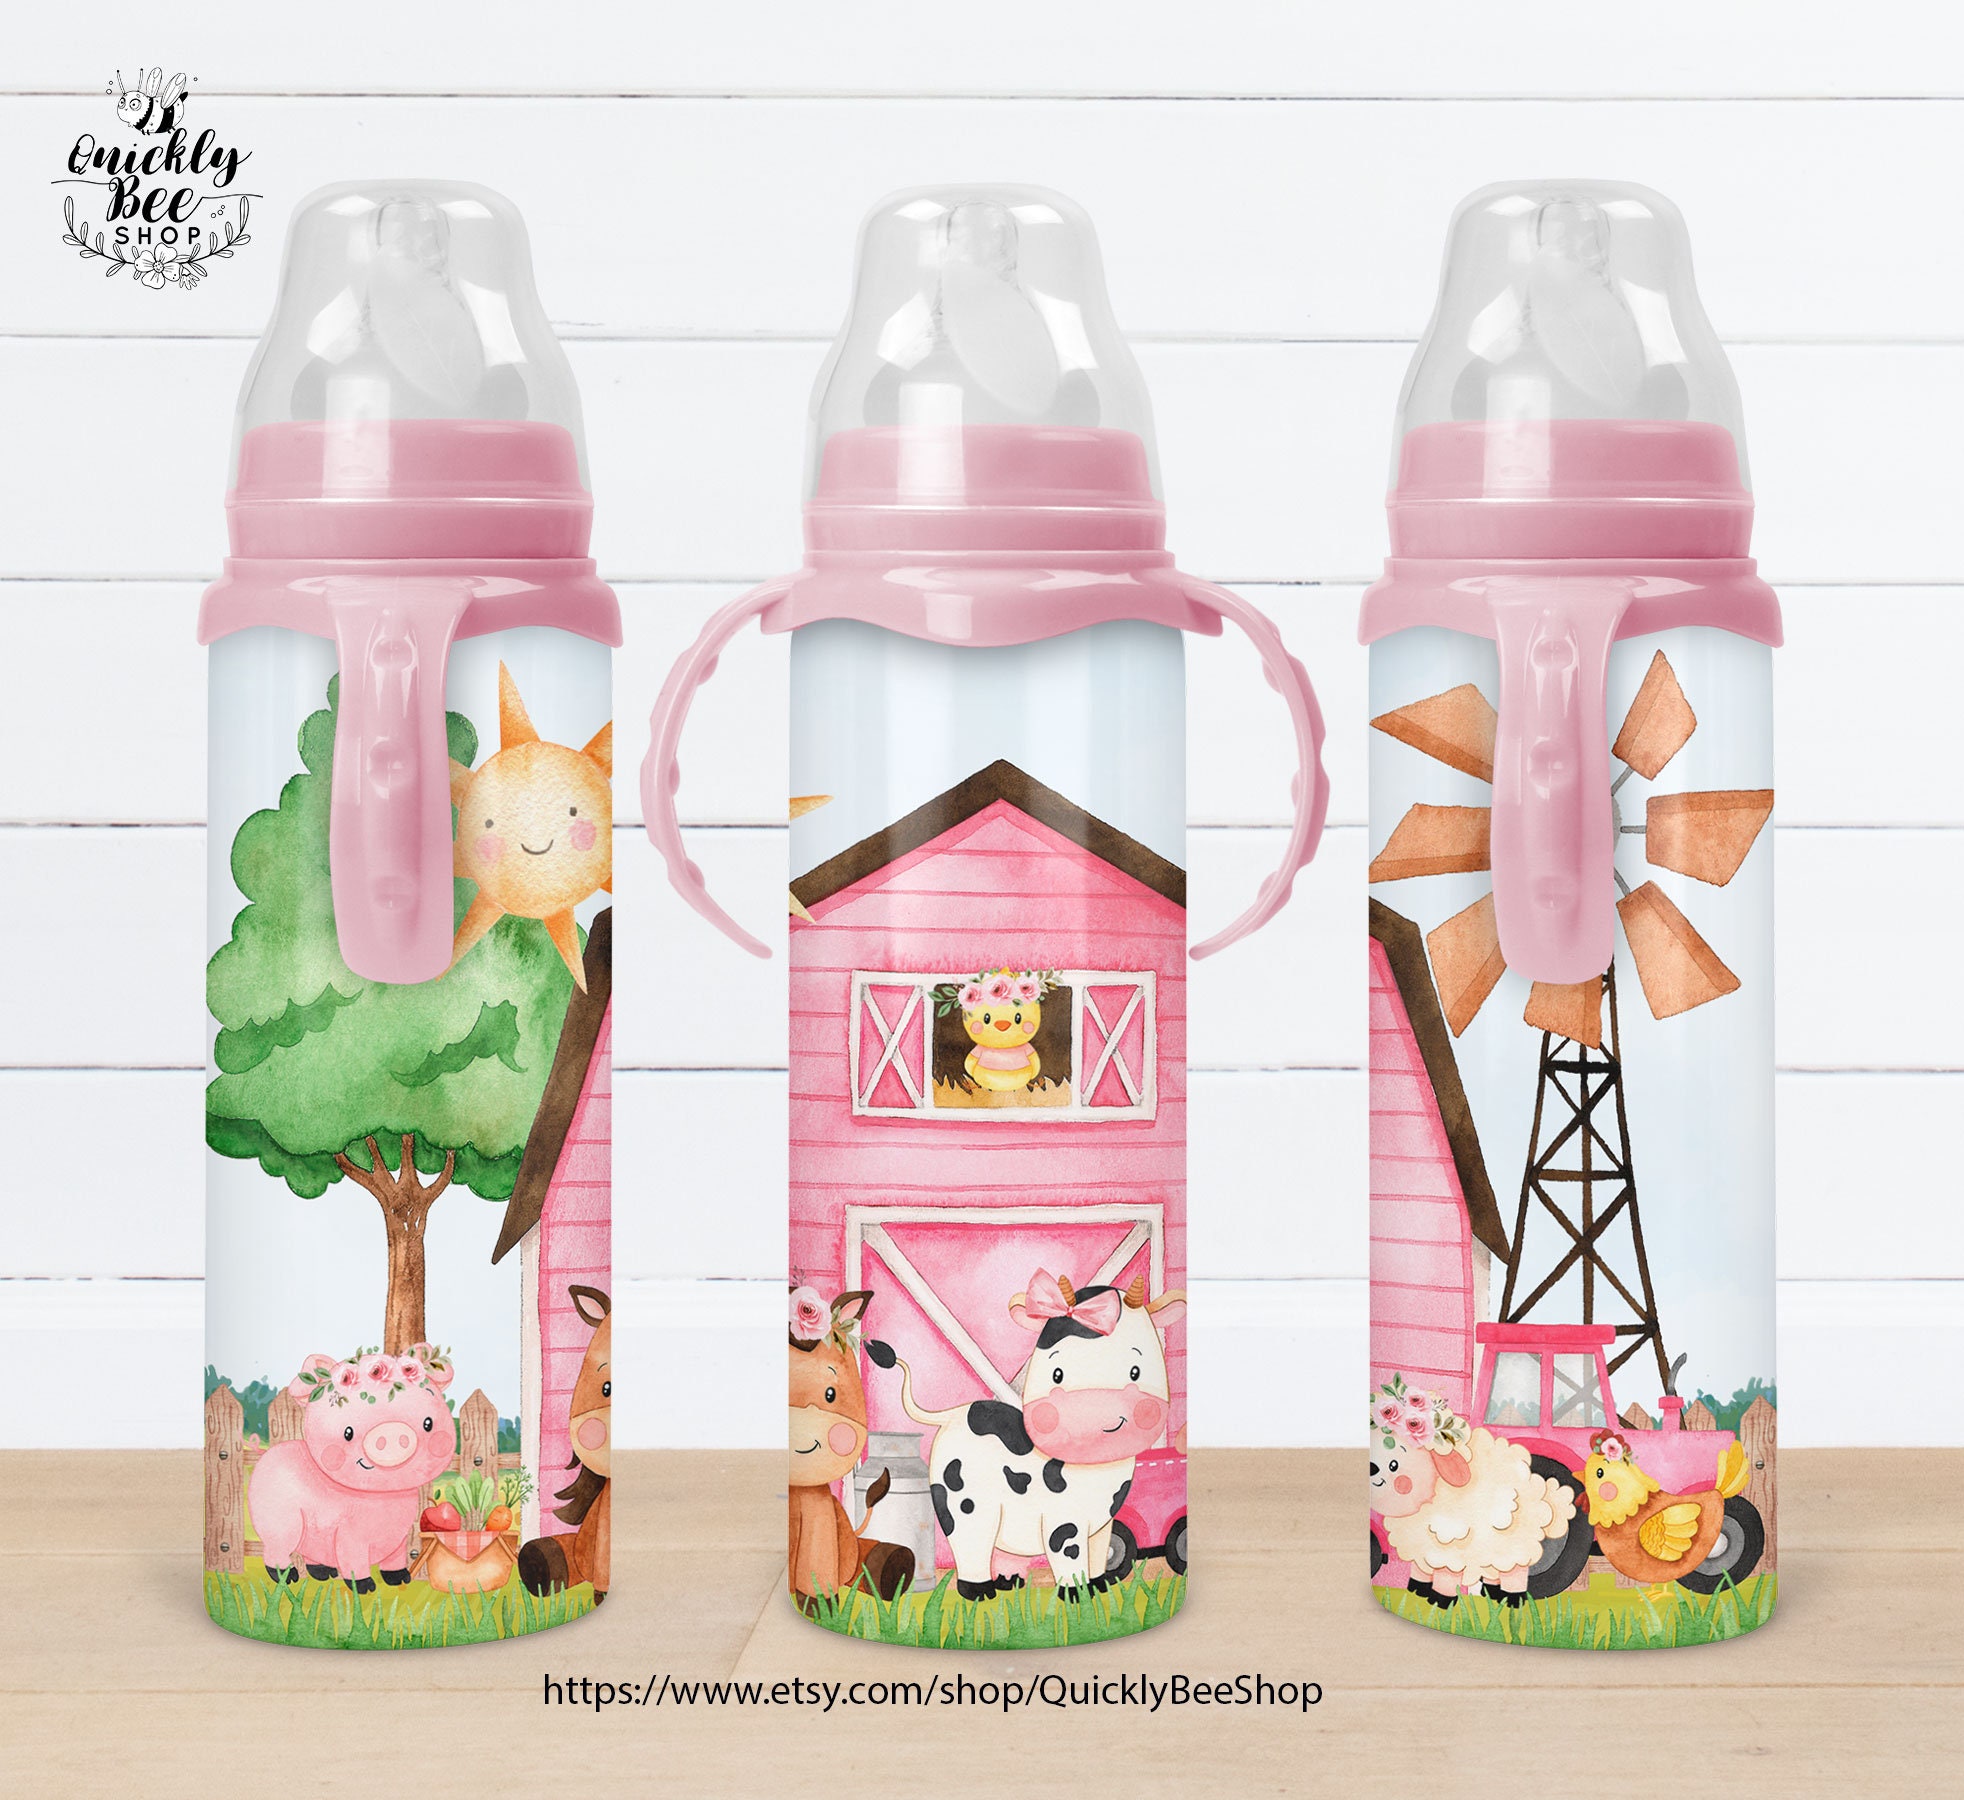 8oz Baby Bottle Sublimation Design, the Adventure Begins, Wilderness,  Camping, Baby Sublimation Design, PNG File, Instant Download, Template -   Norway